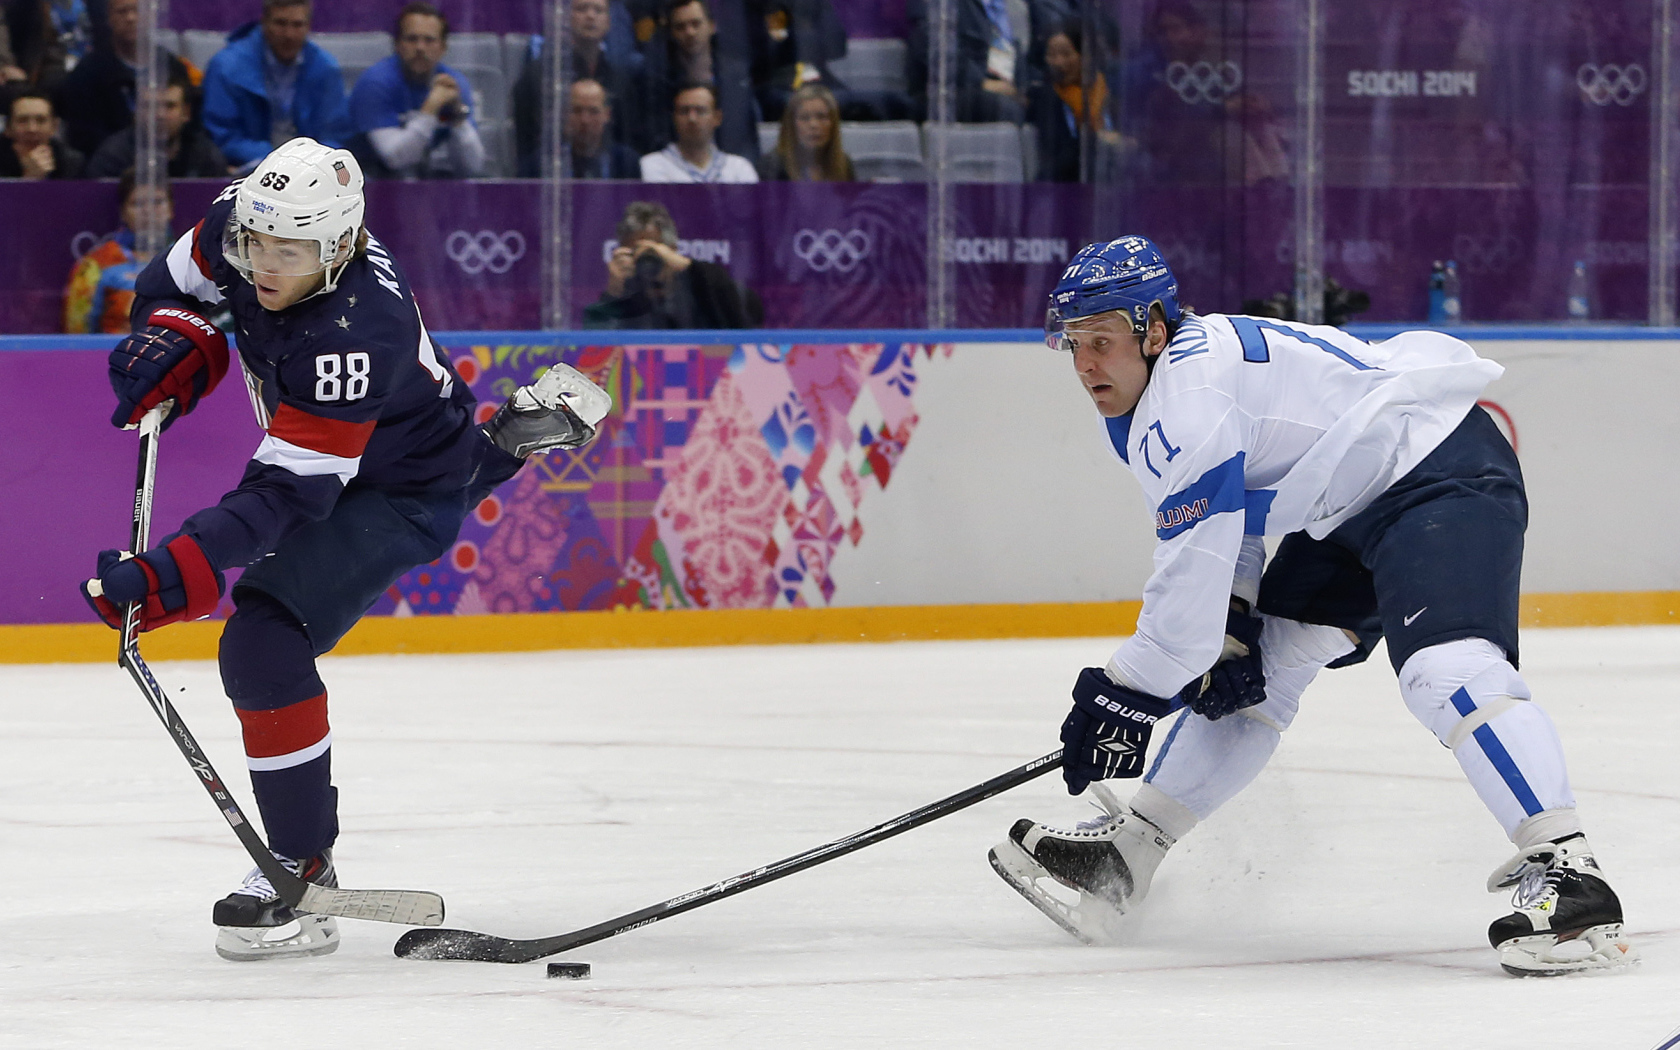 Finnish hockey bronze medal at the Olympic Games in Sochi